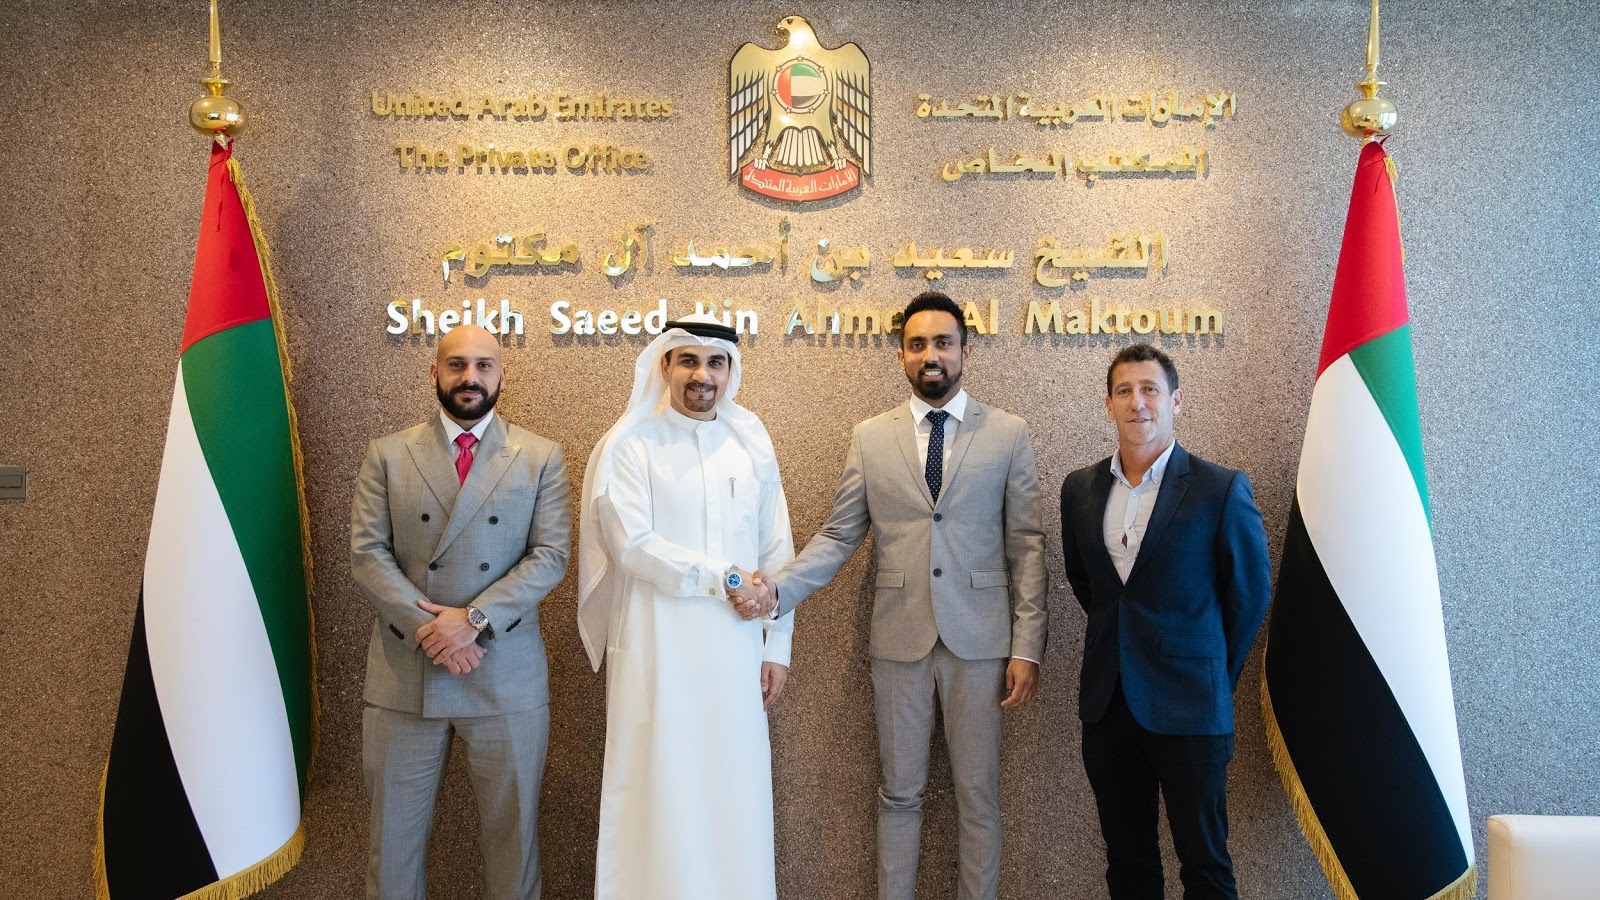 Fantom Foundation Partners with The Private Office of Sheikh Saeed bin Ahmed Al Maktoum and SEED Group to Operate in Dubai